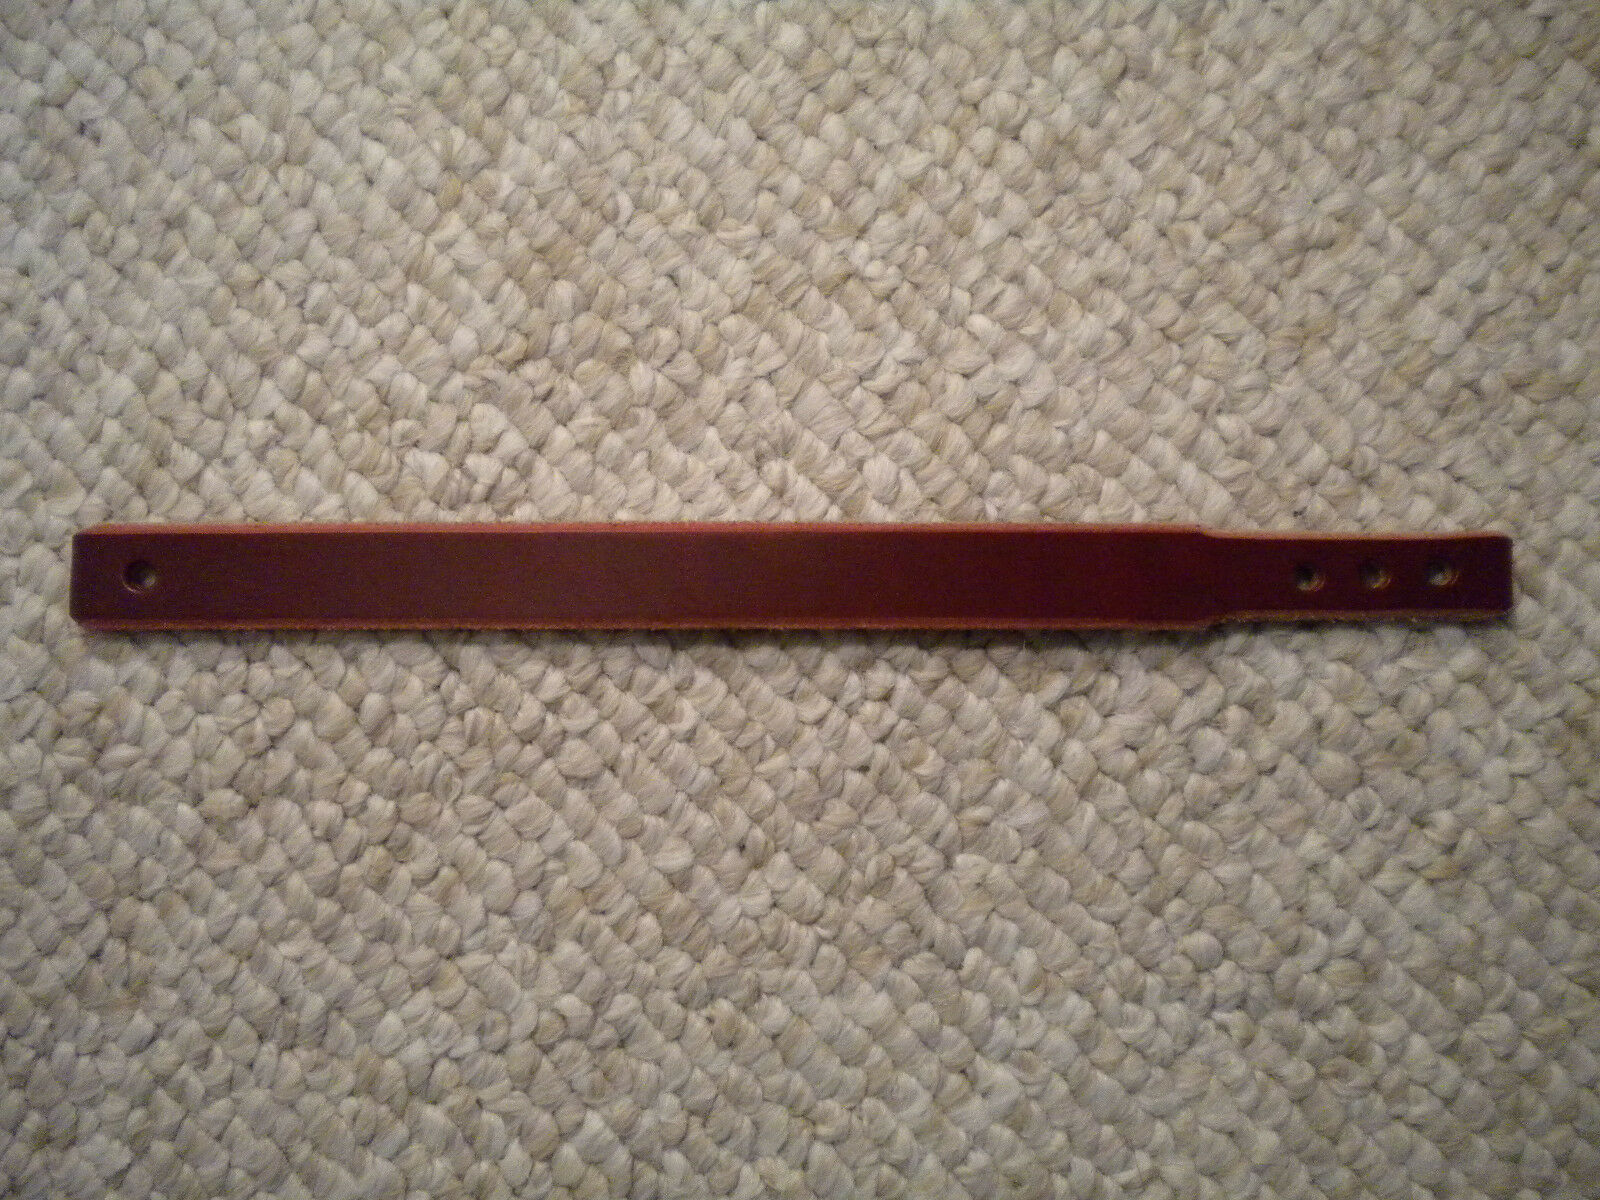 Replacement Leather Strap For Camco & Gretsch Bass Drum Pedals!